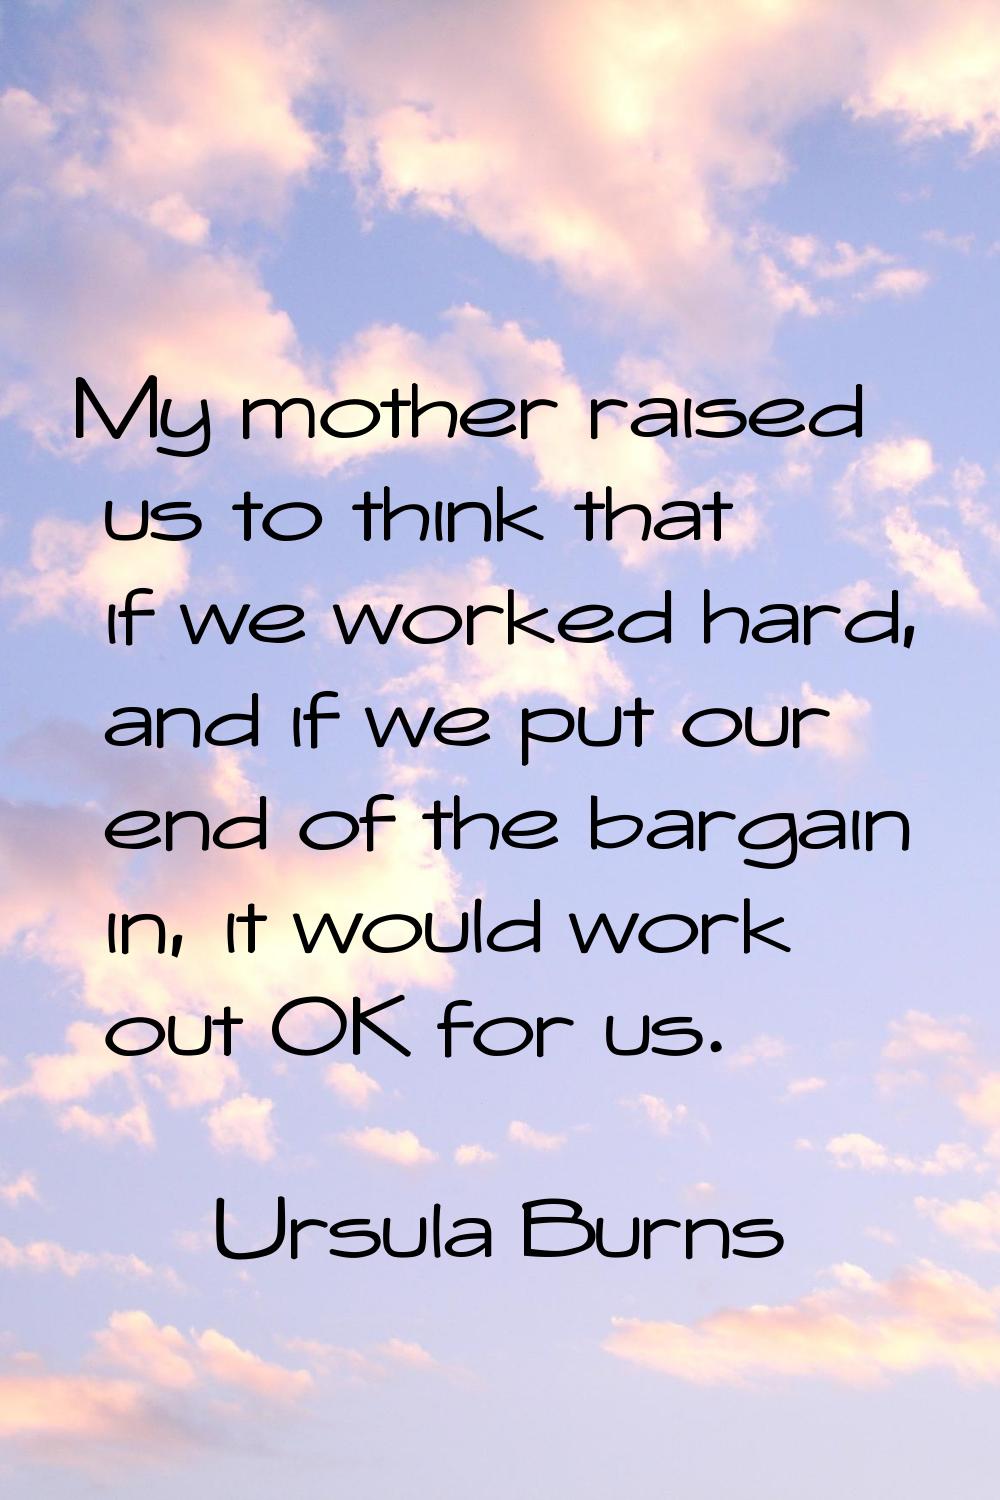 My mother raised us to think that if we worked hard, and if we put our end of the bargain in, it wo